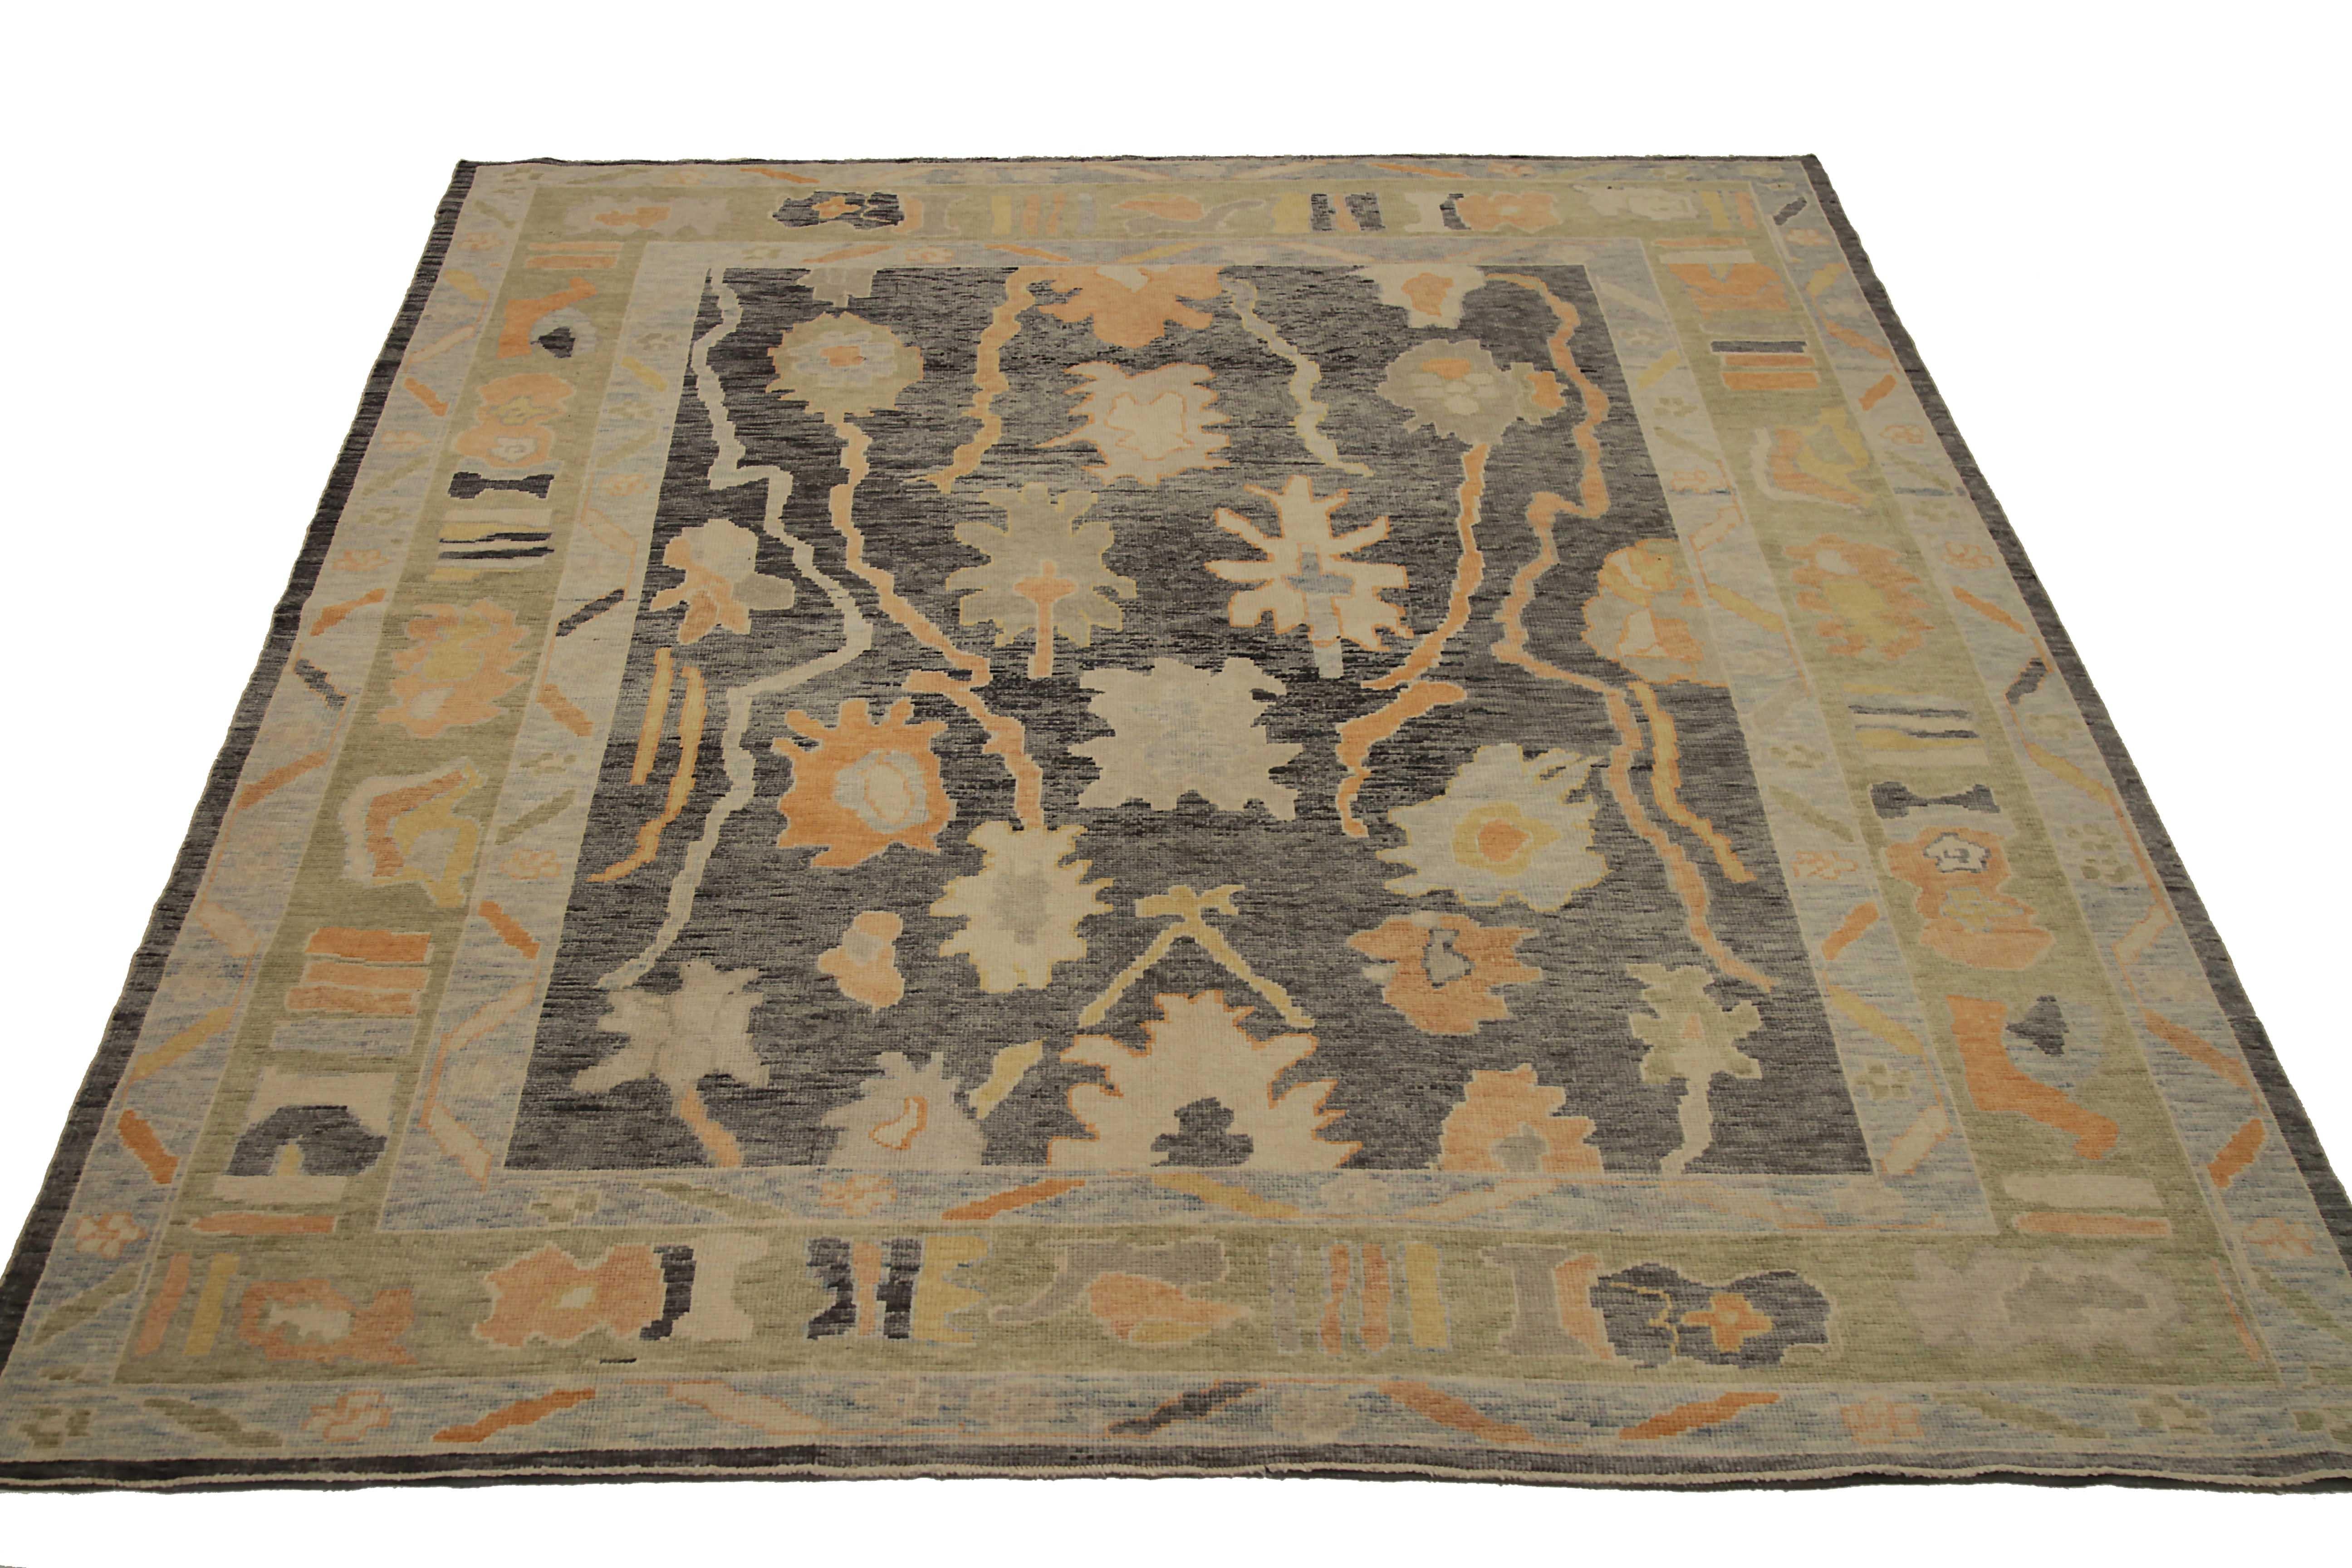 New Turkish area rug handwoven from the finest sheep’s wool. It’s colored with all-natural vegetable dyes that are safe for humans and pets. It’s a traditional Oushak design handwoven by expert artisans. It’s a lovely area rug that can be